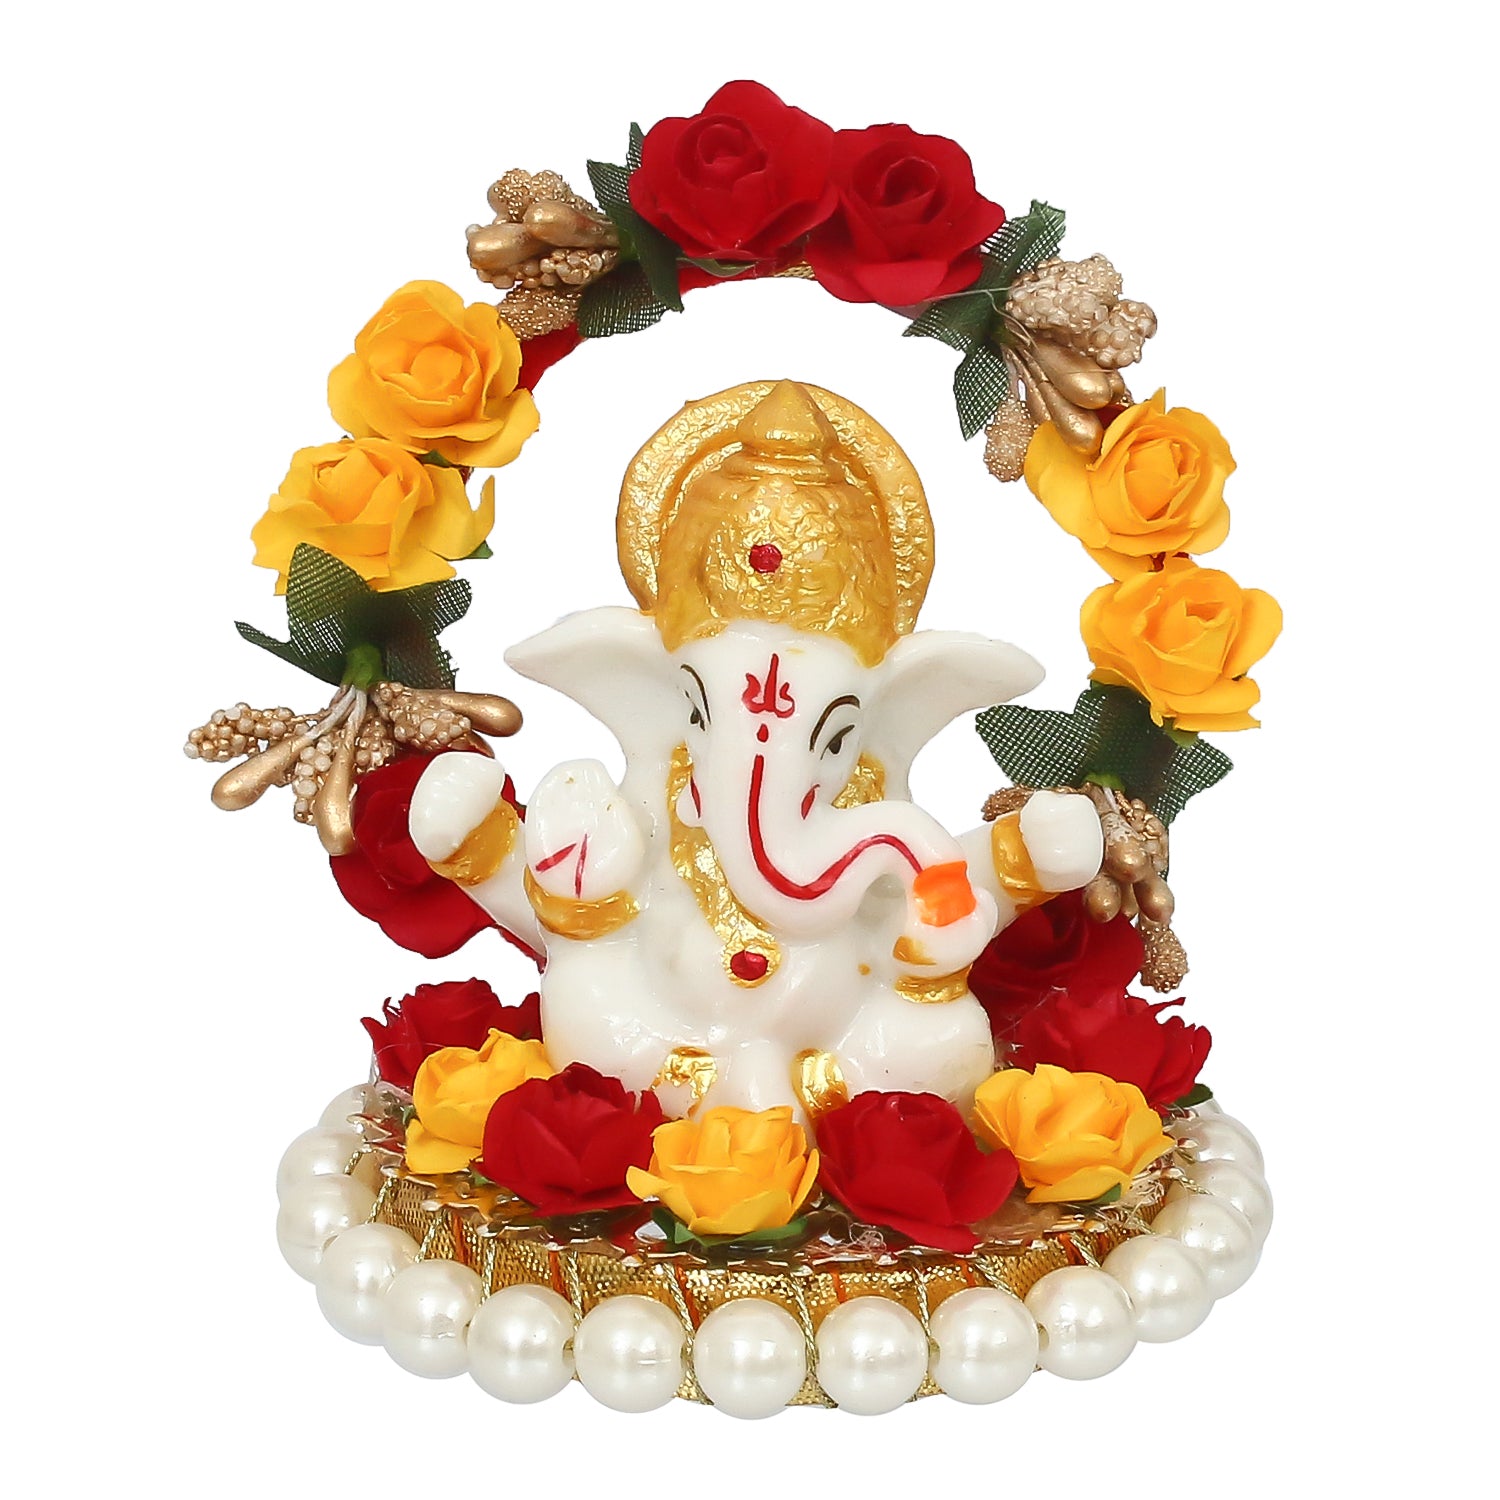 Polyresin Lord Ganesha Idol on Decorative Handcrafted Rose Flower Plate for Home and Car Dashboard 1